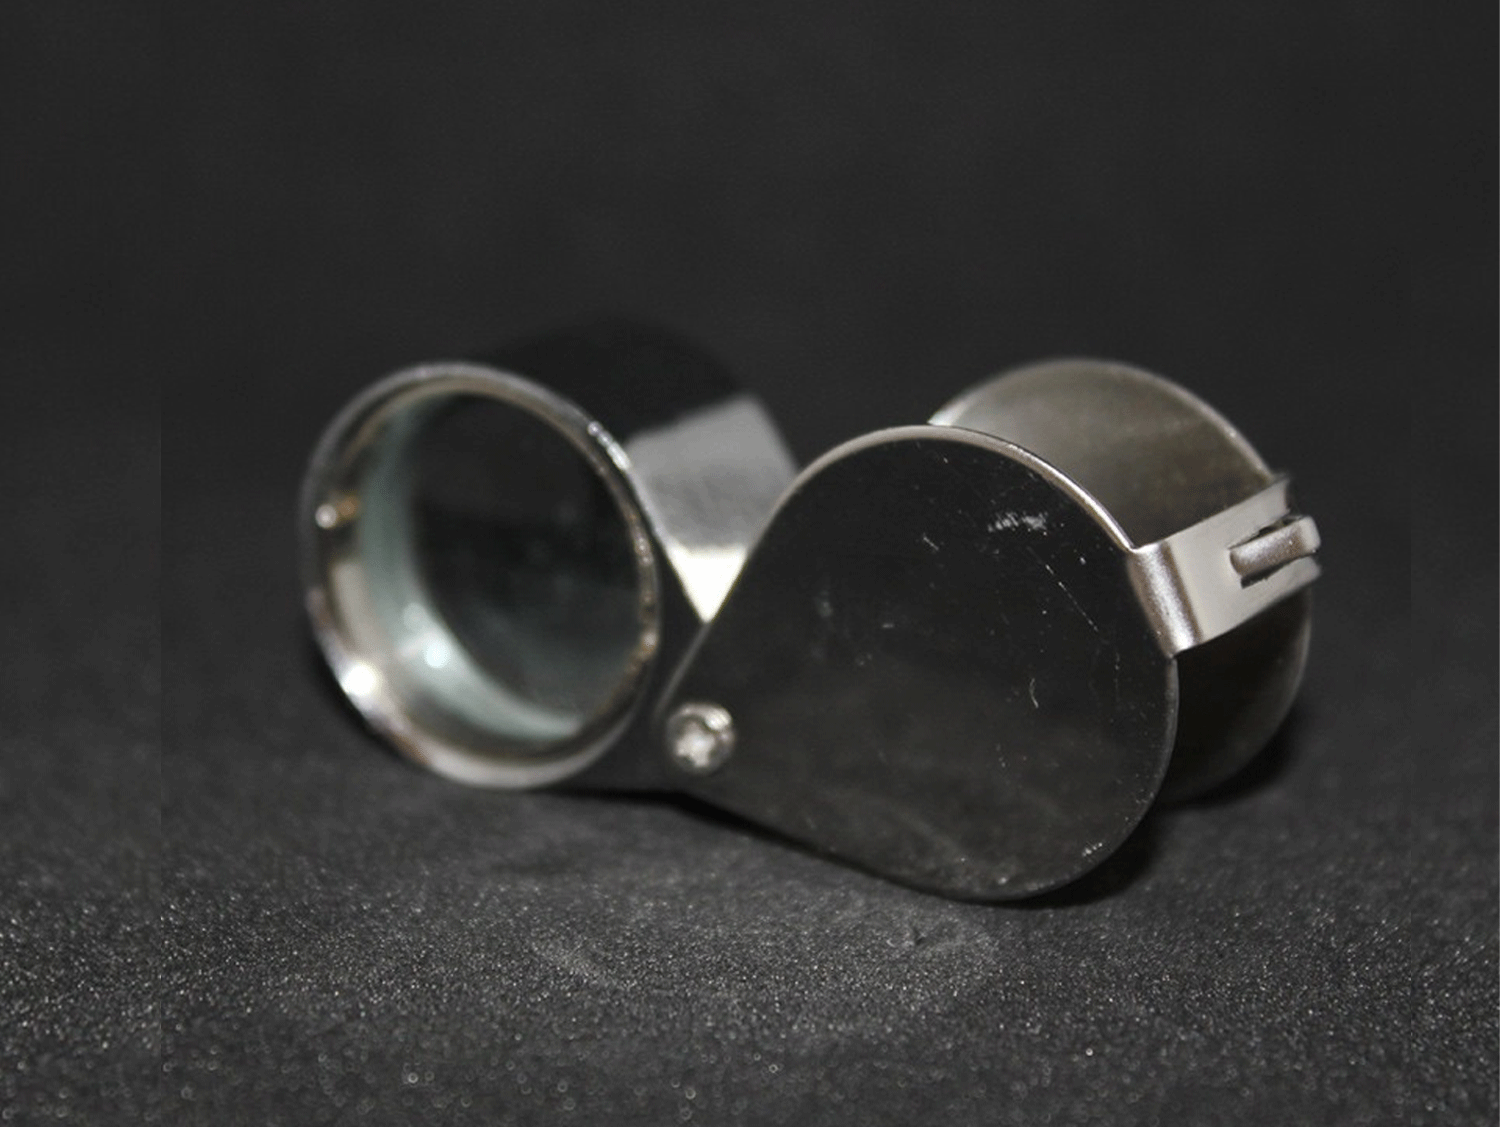 Detailed Inspection Triplet Magnifier Loupe 20x